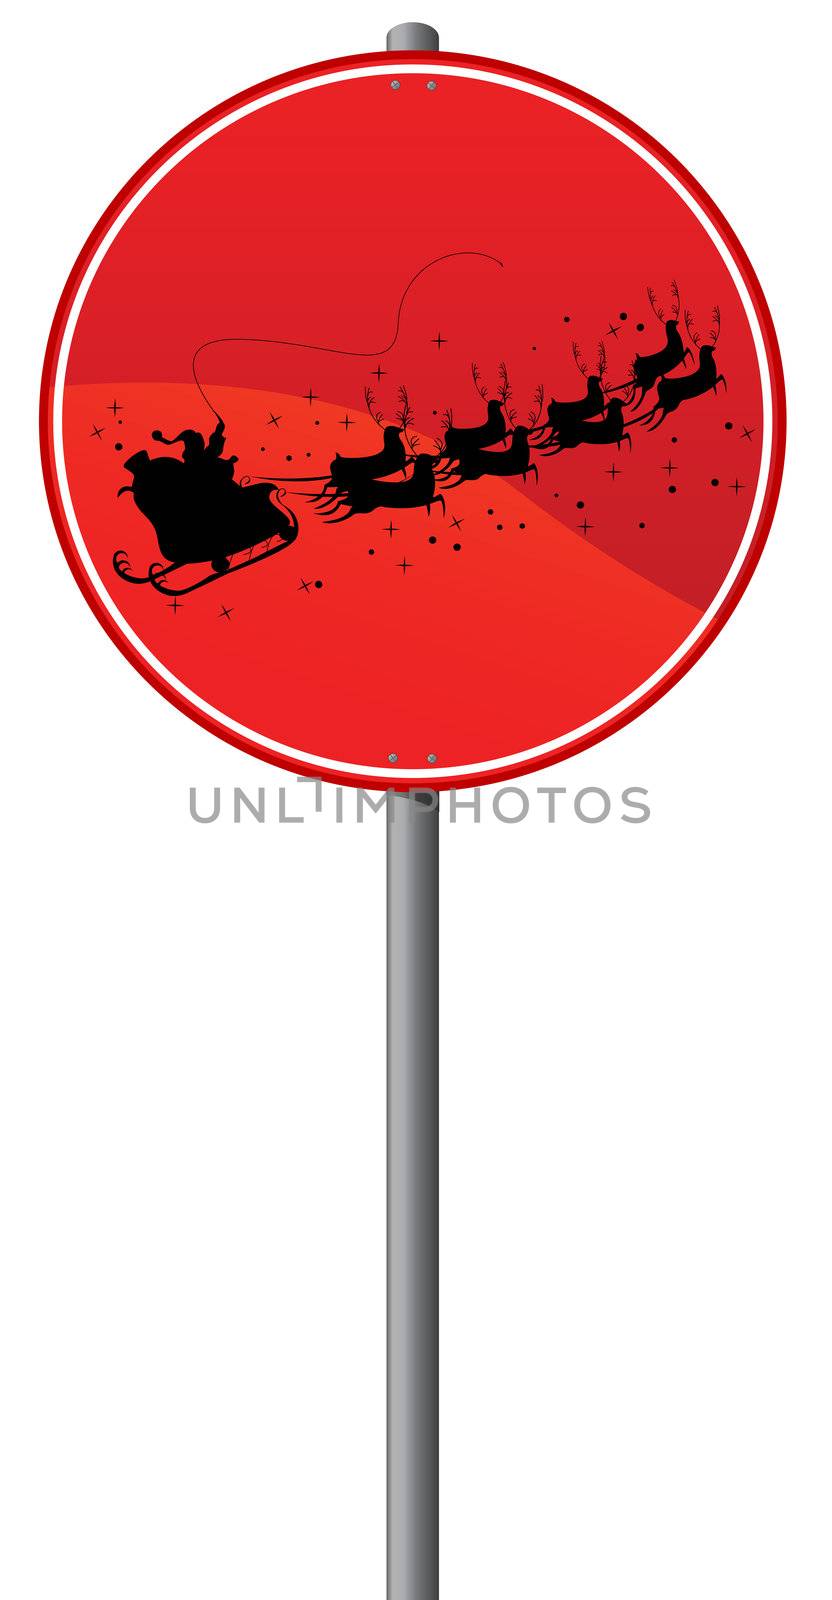 Flying Reindeer warning sign, isolated object over white background